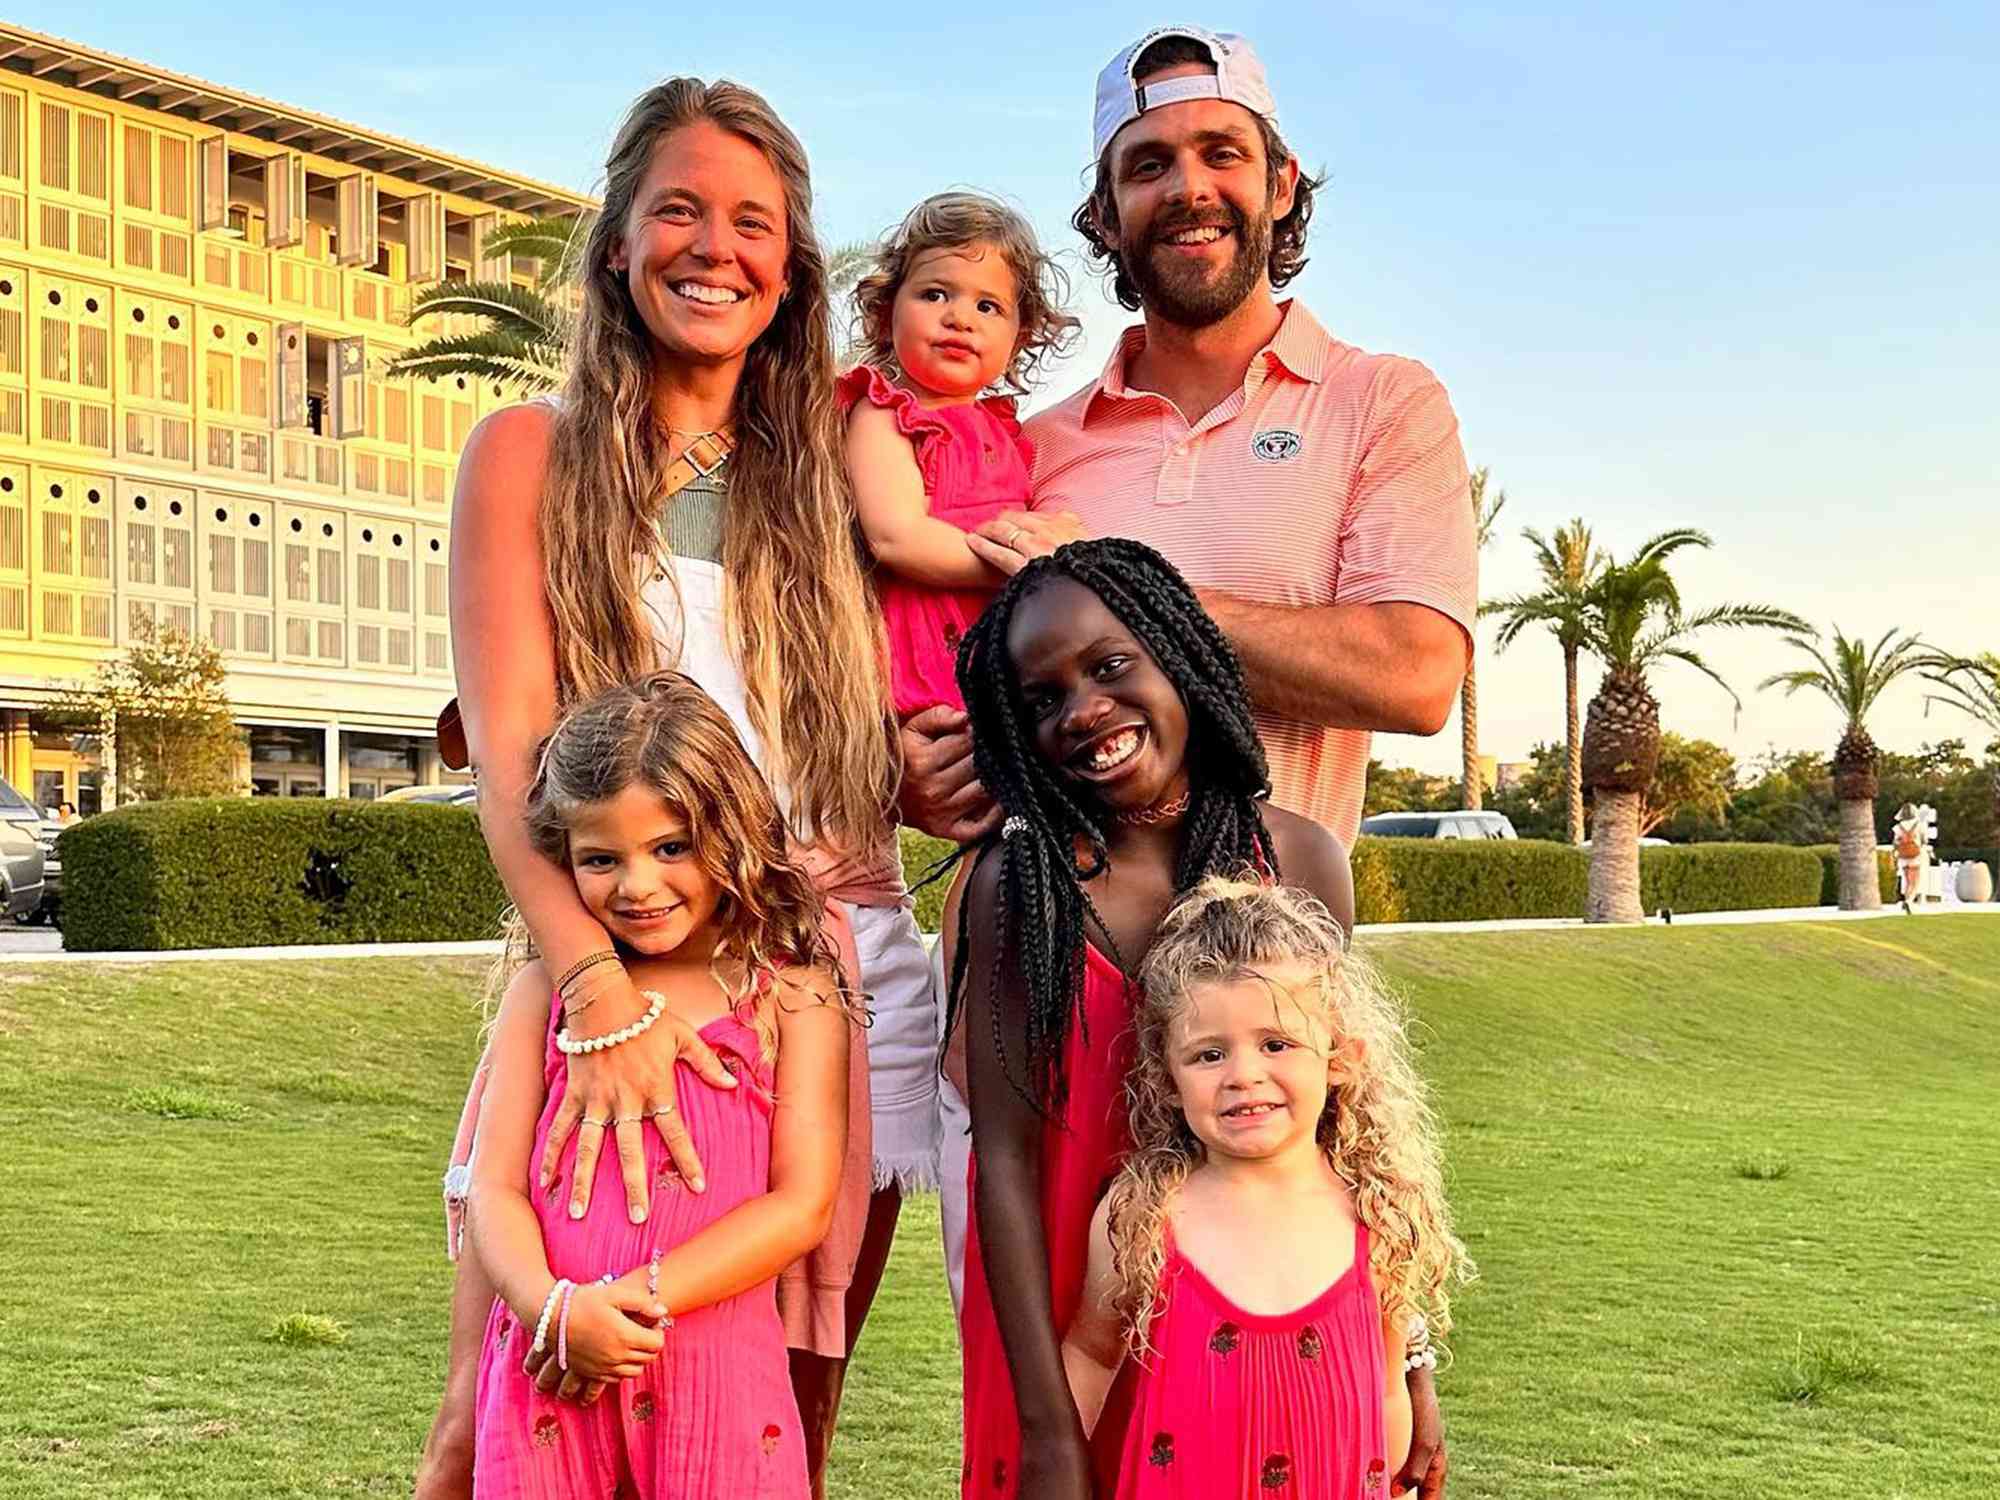 Thomas Rhett Reveals Daughter Willa's Hilarious Reaction When Hearing Dad's New Album for the First Time